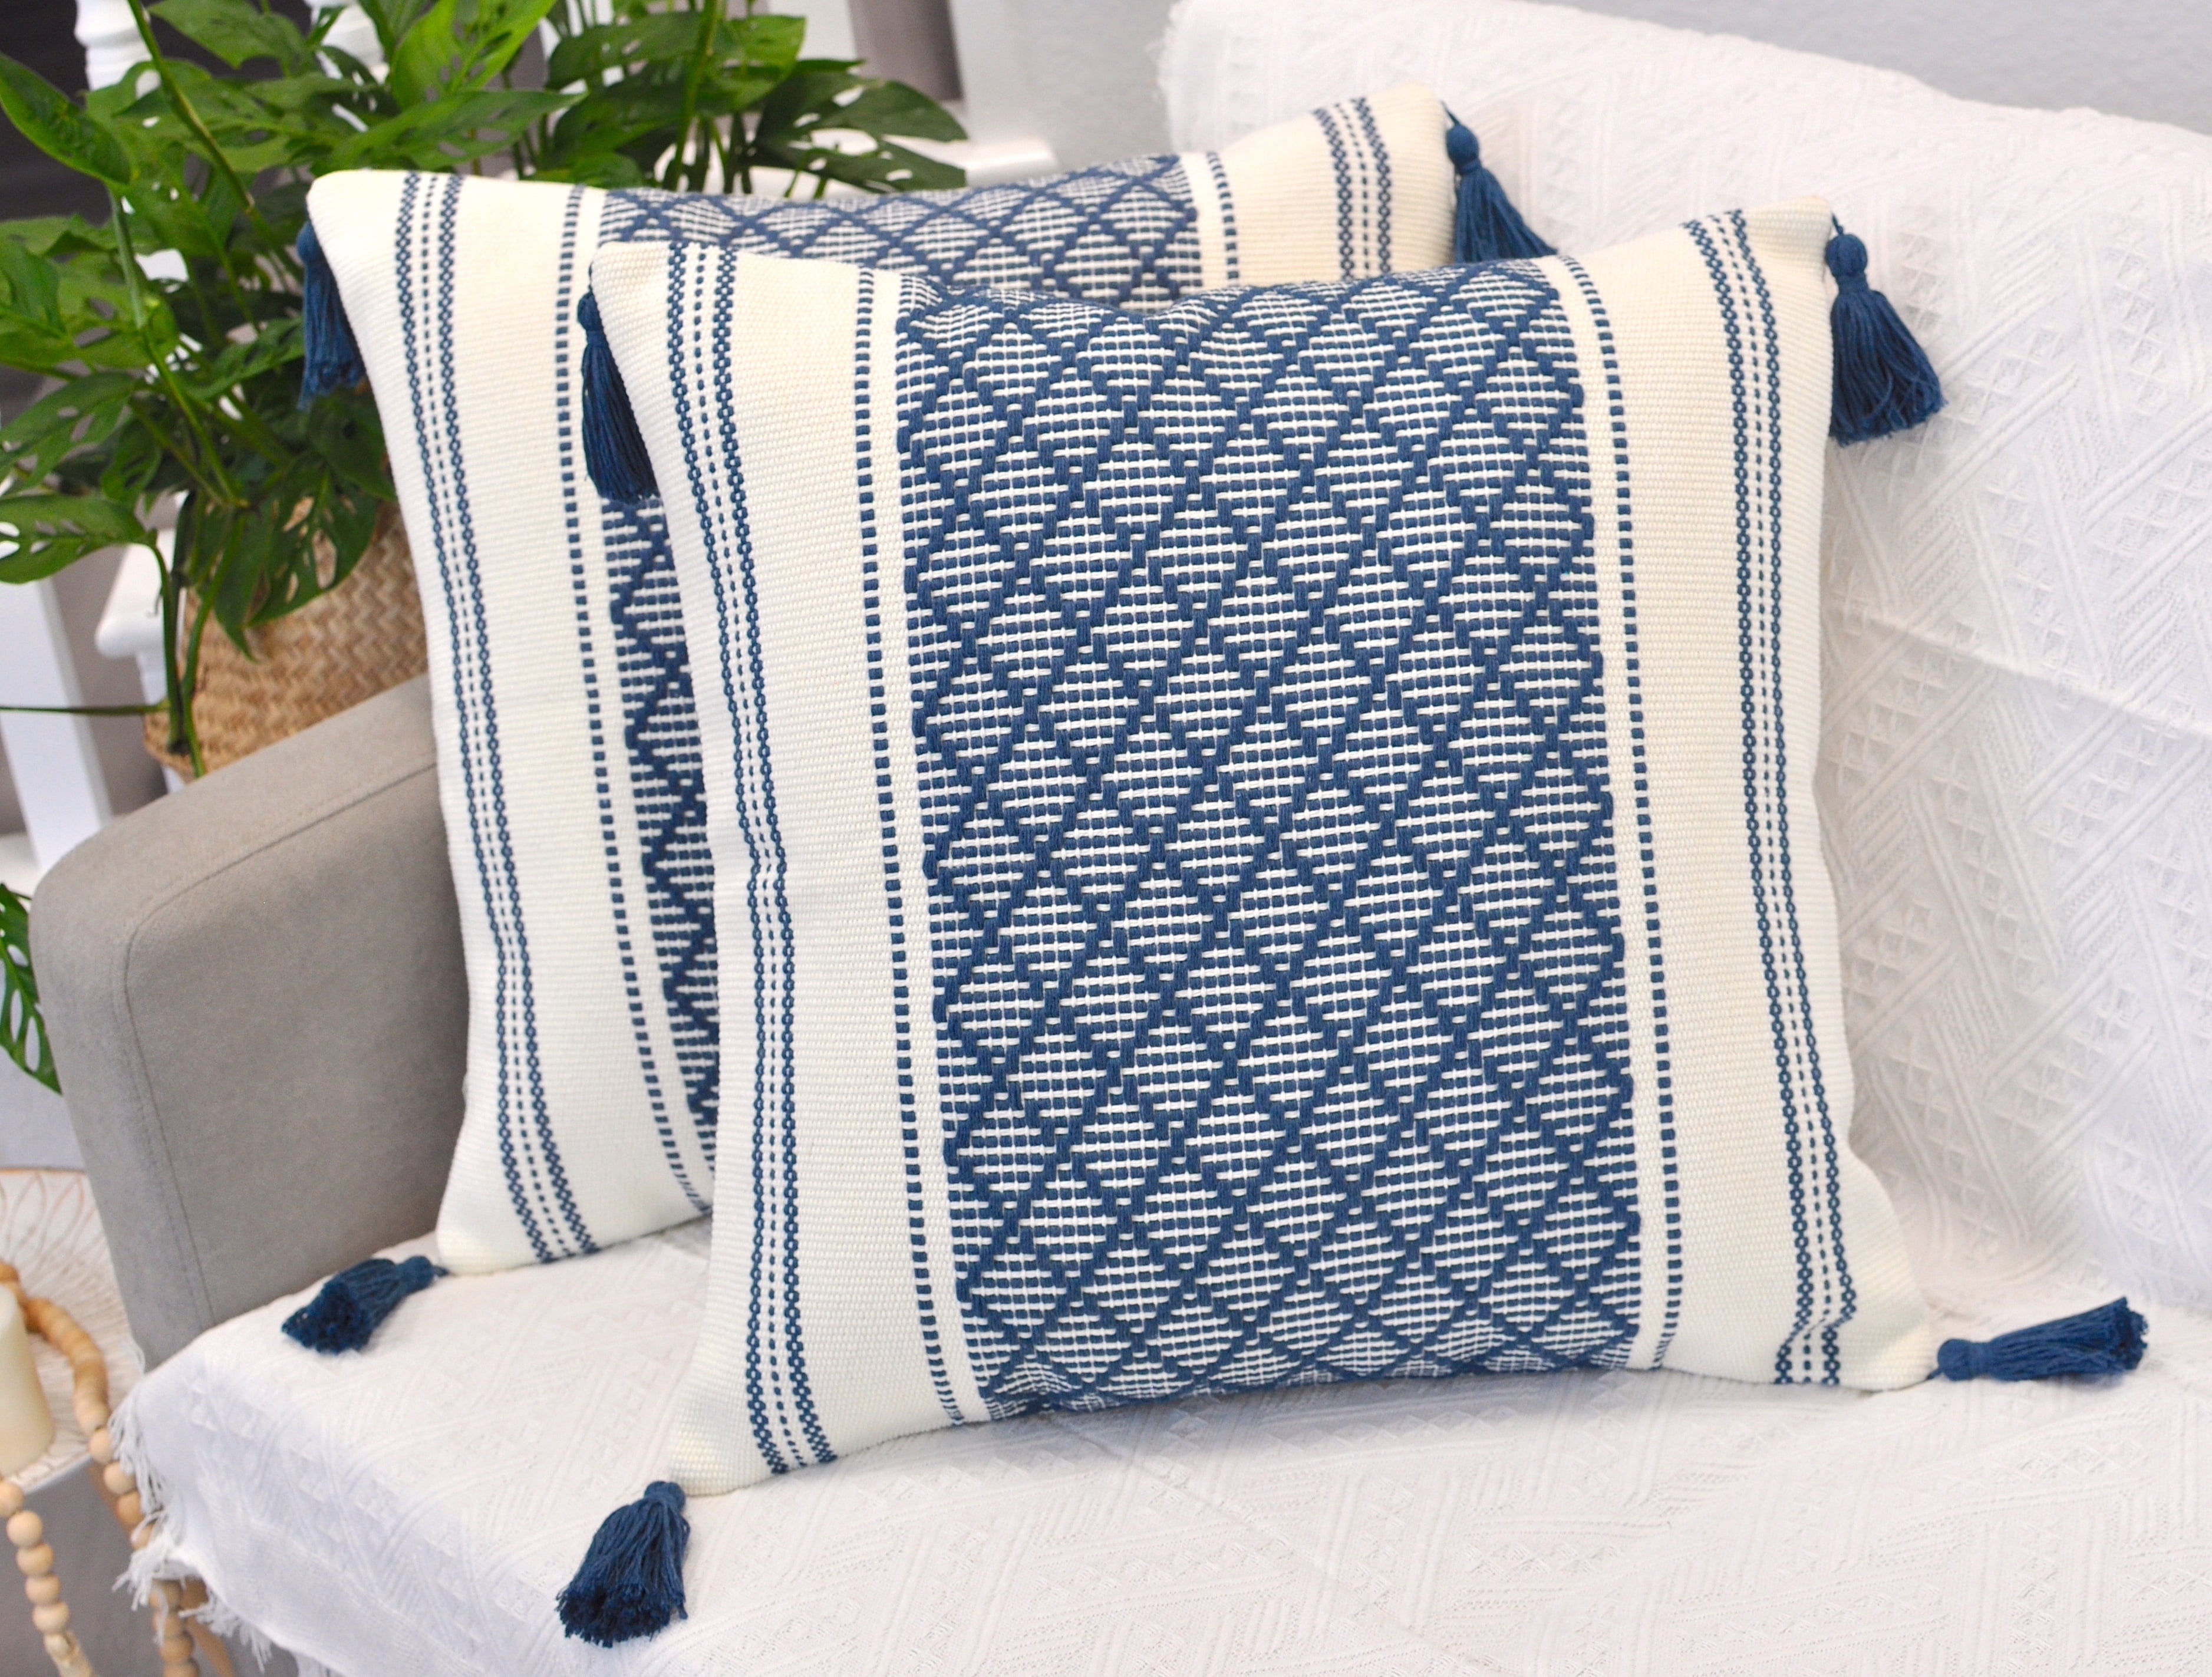  JASEN Boho Decorative Throw Pillow Cover，Blue and Beige Woven  Tufted Pillow Cover with Tassels Bohemia Pillow Covers for Couch Sofa  Bedroom Living Room 18x18 Inch : Home & Kitchen